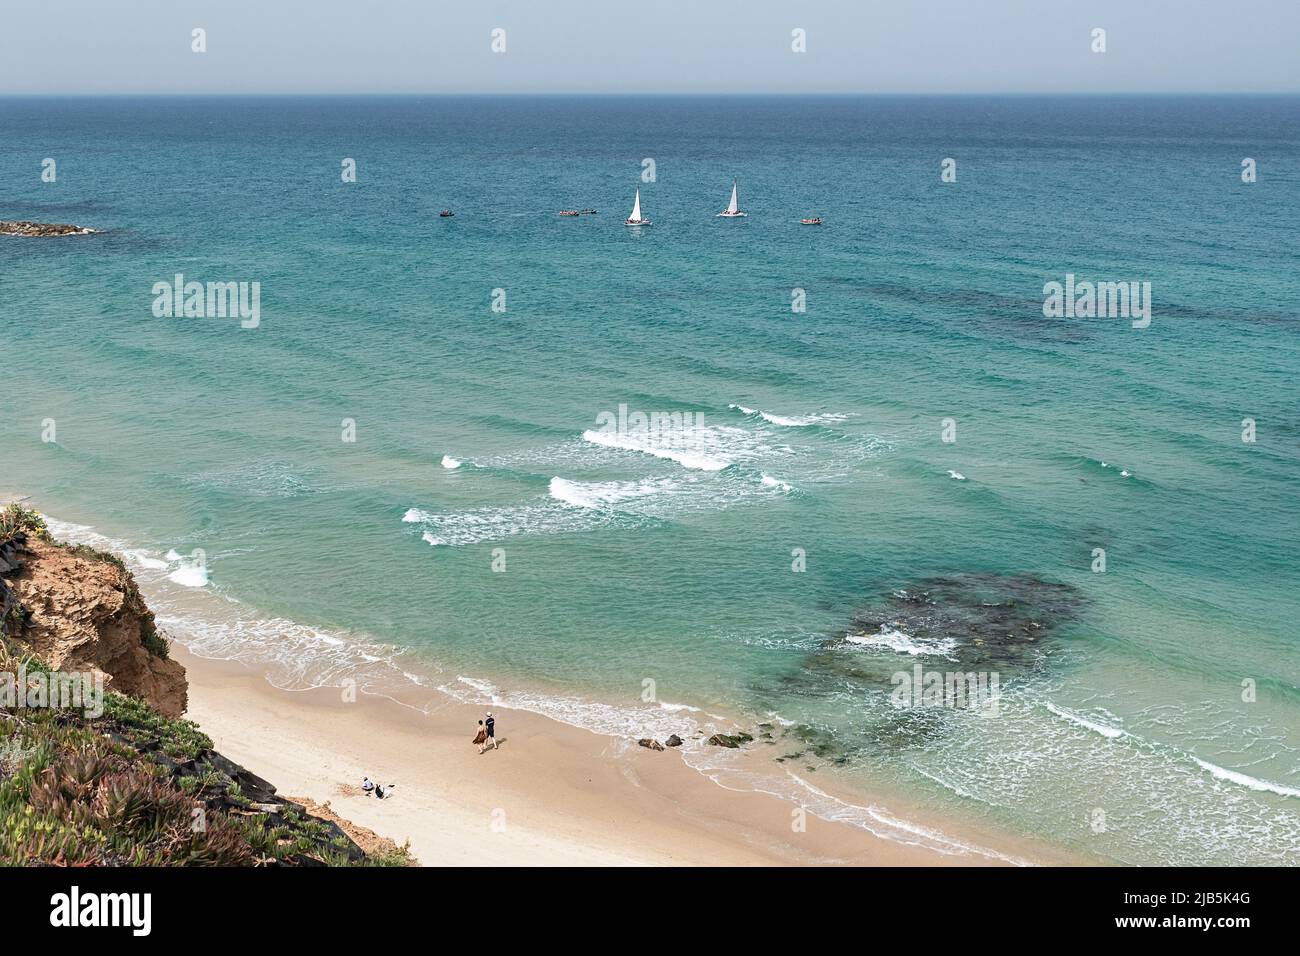 looking down from the cliff onto the eastern Mediterranean Beach at Netanya in Israel with people on the beach and small boats sailing in the sea Stock Photo